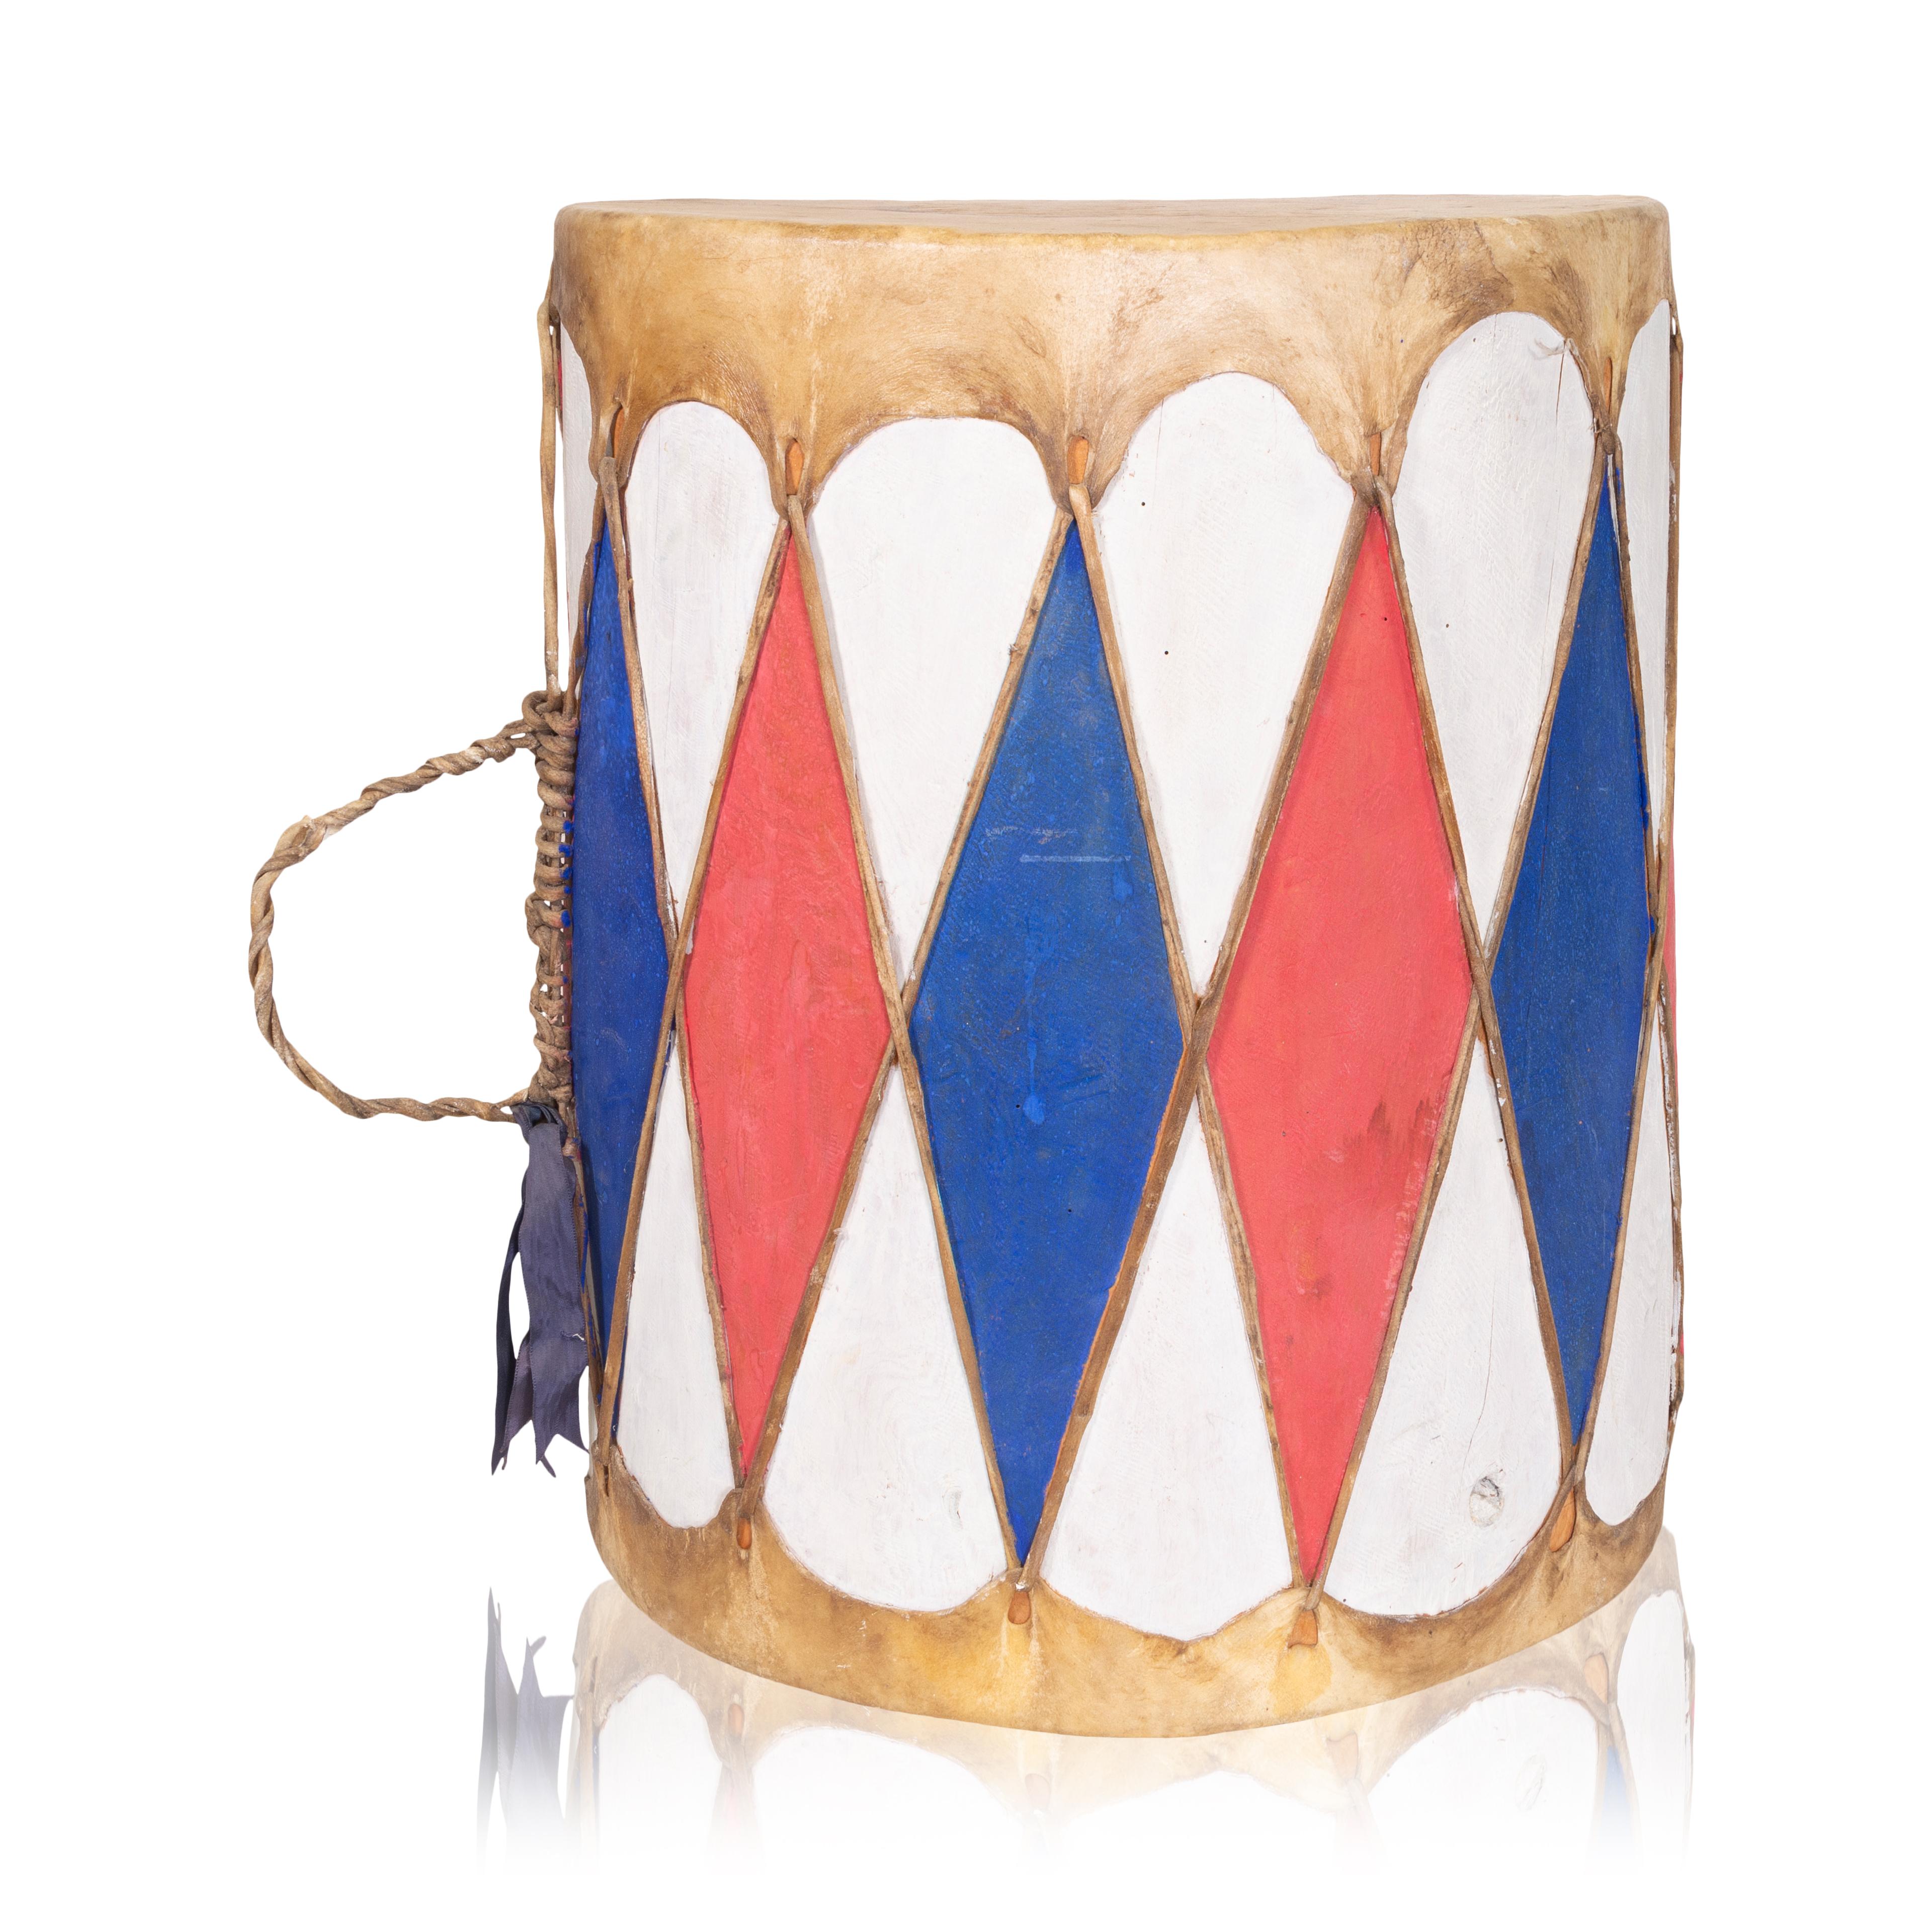 Native American Pueblo Painted Drum In Good Condition For Sale In Coeur d'Alene, ID